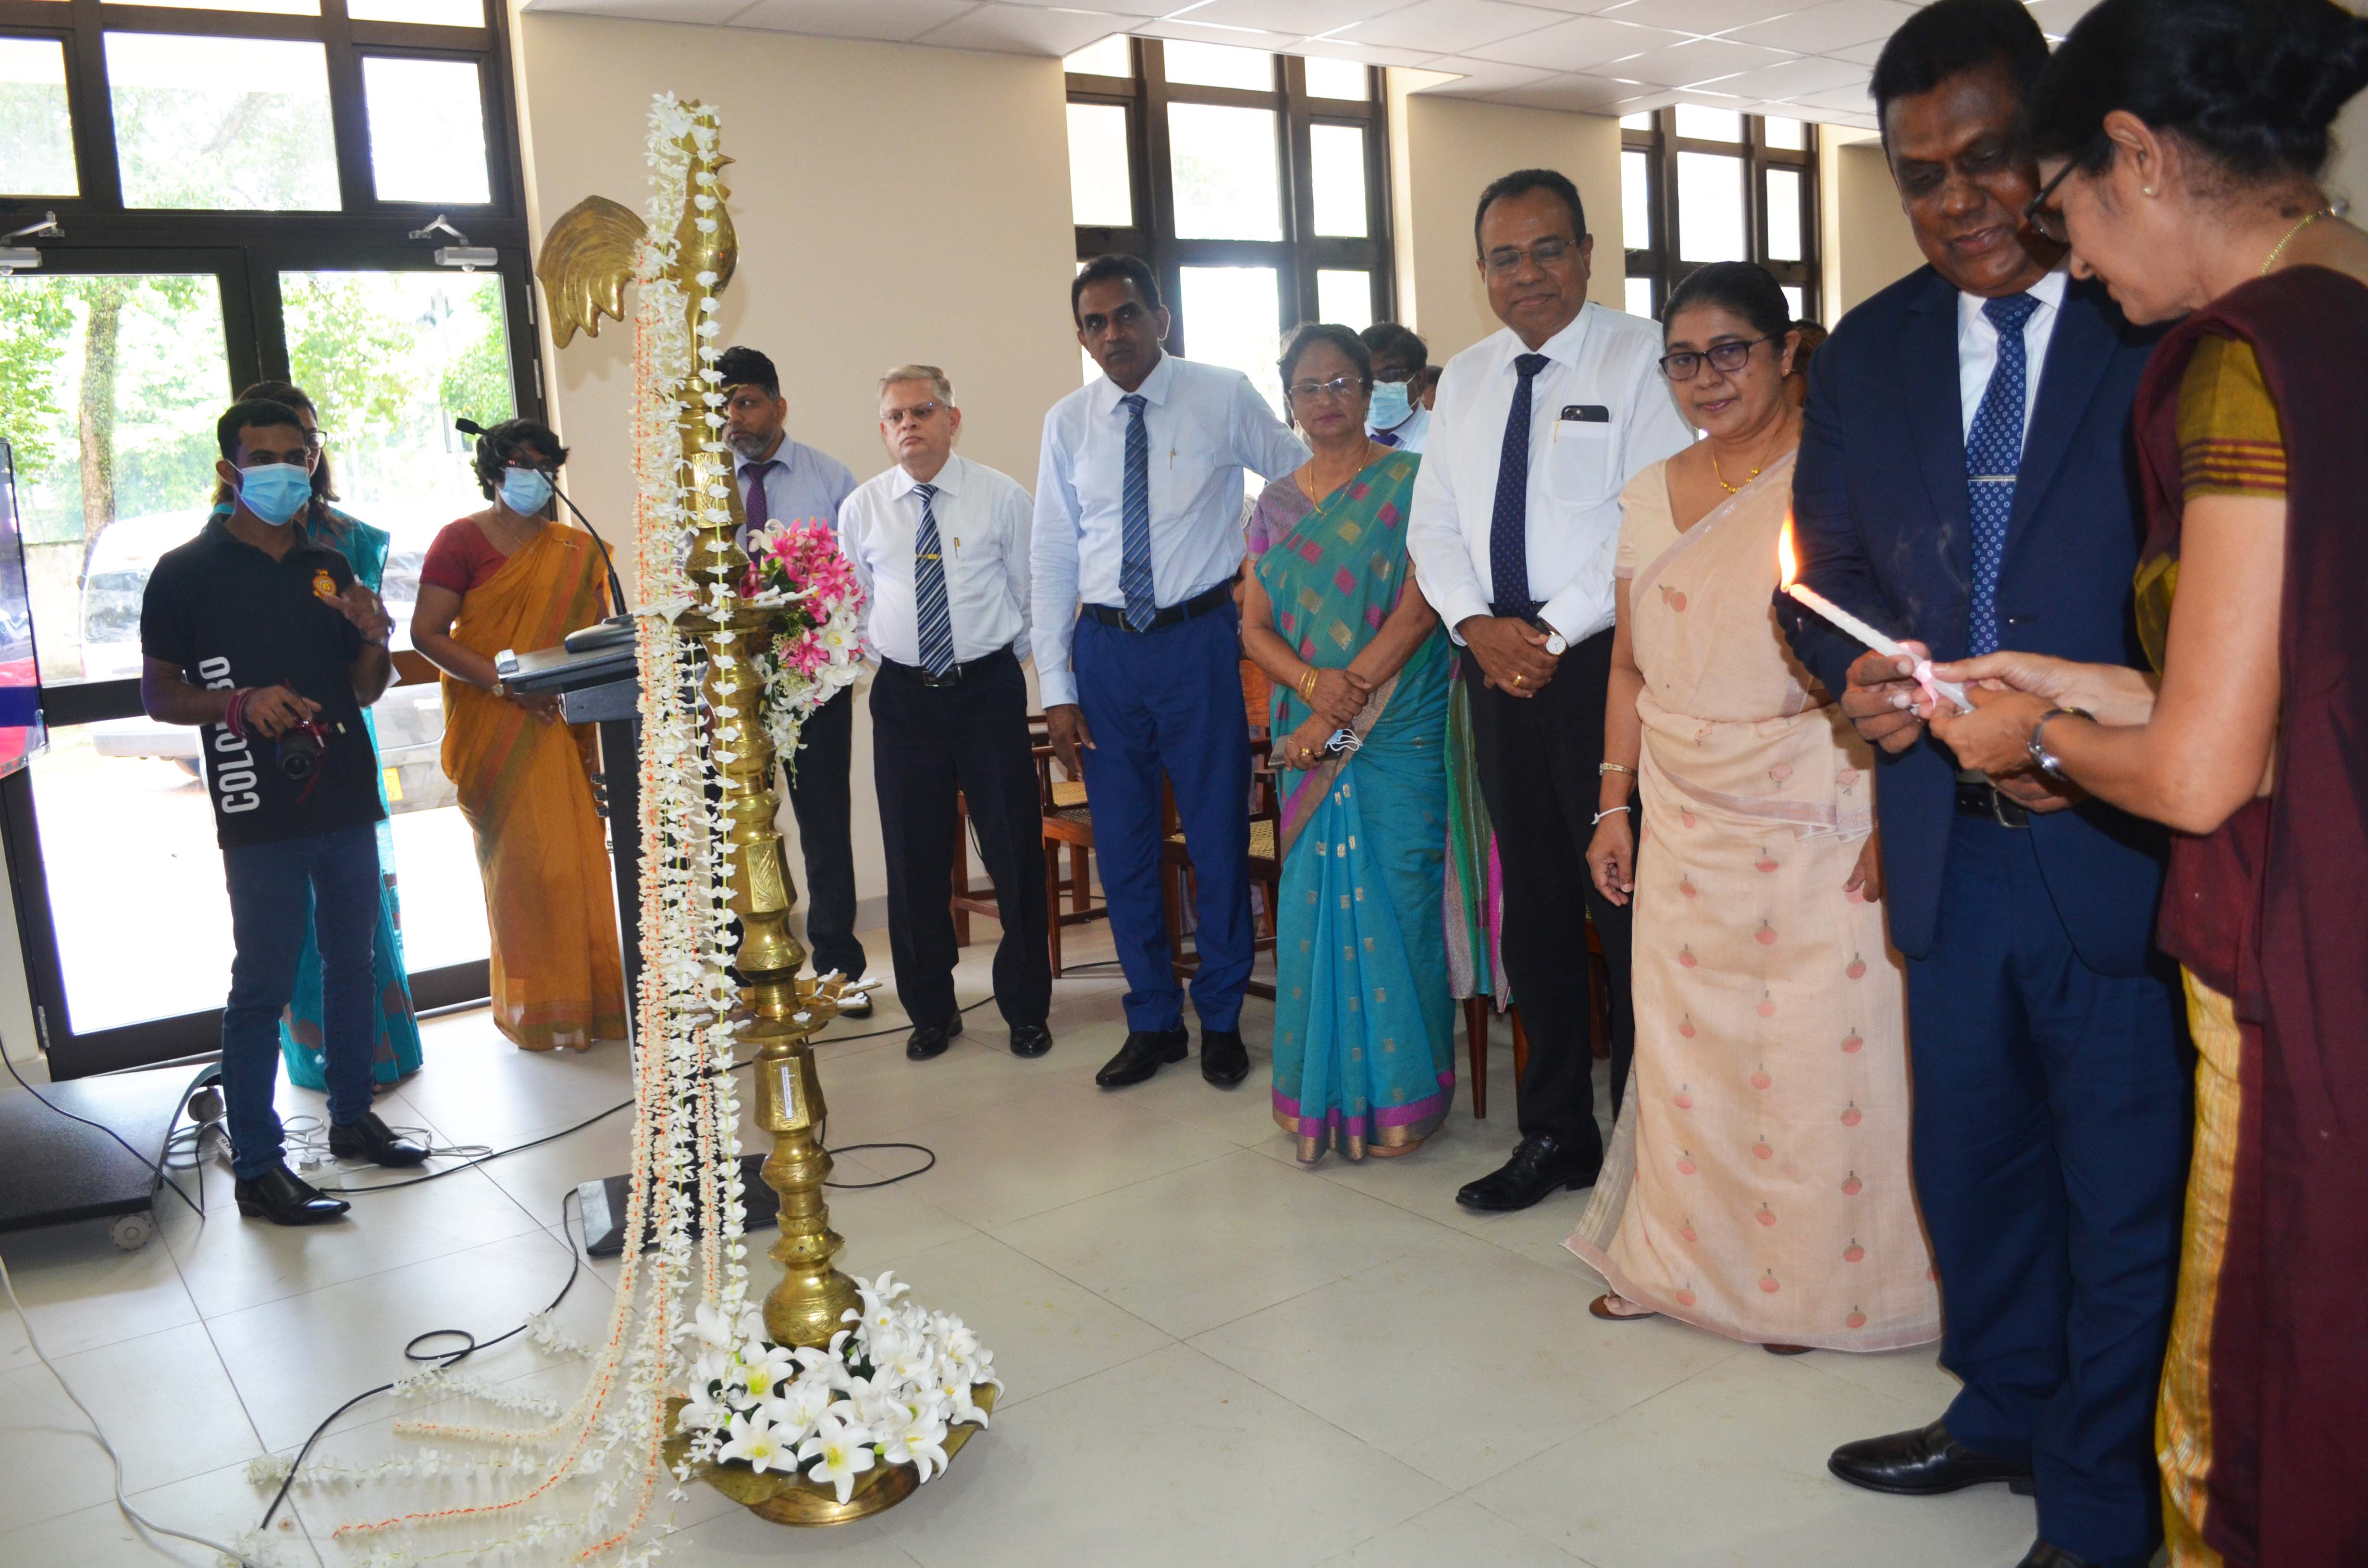 The Opening Ceremony of Professorial unit of the Institute of Indigenous Medicine, University of Colombo, National Ayurveda Teaching Hospital